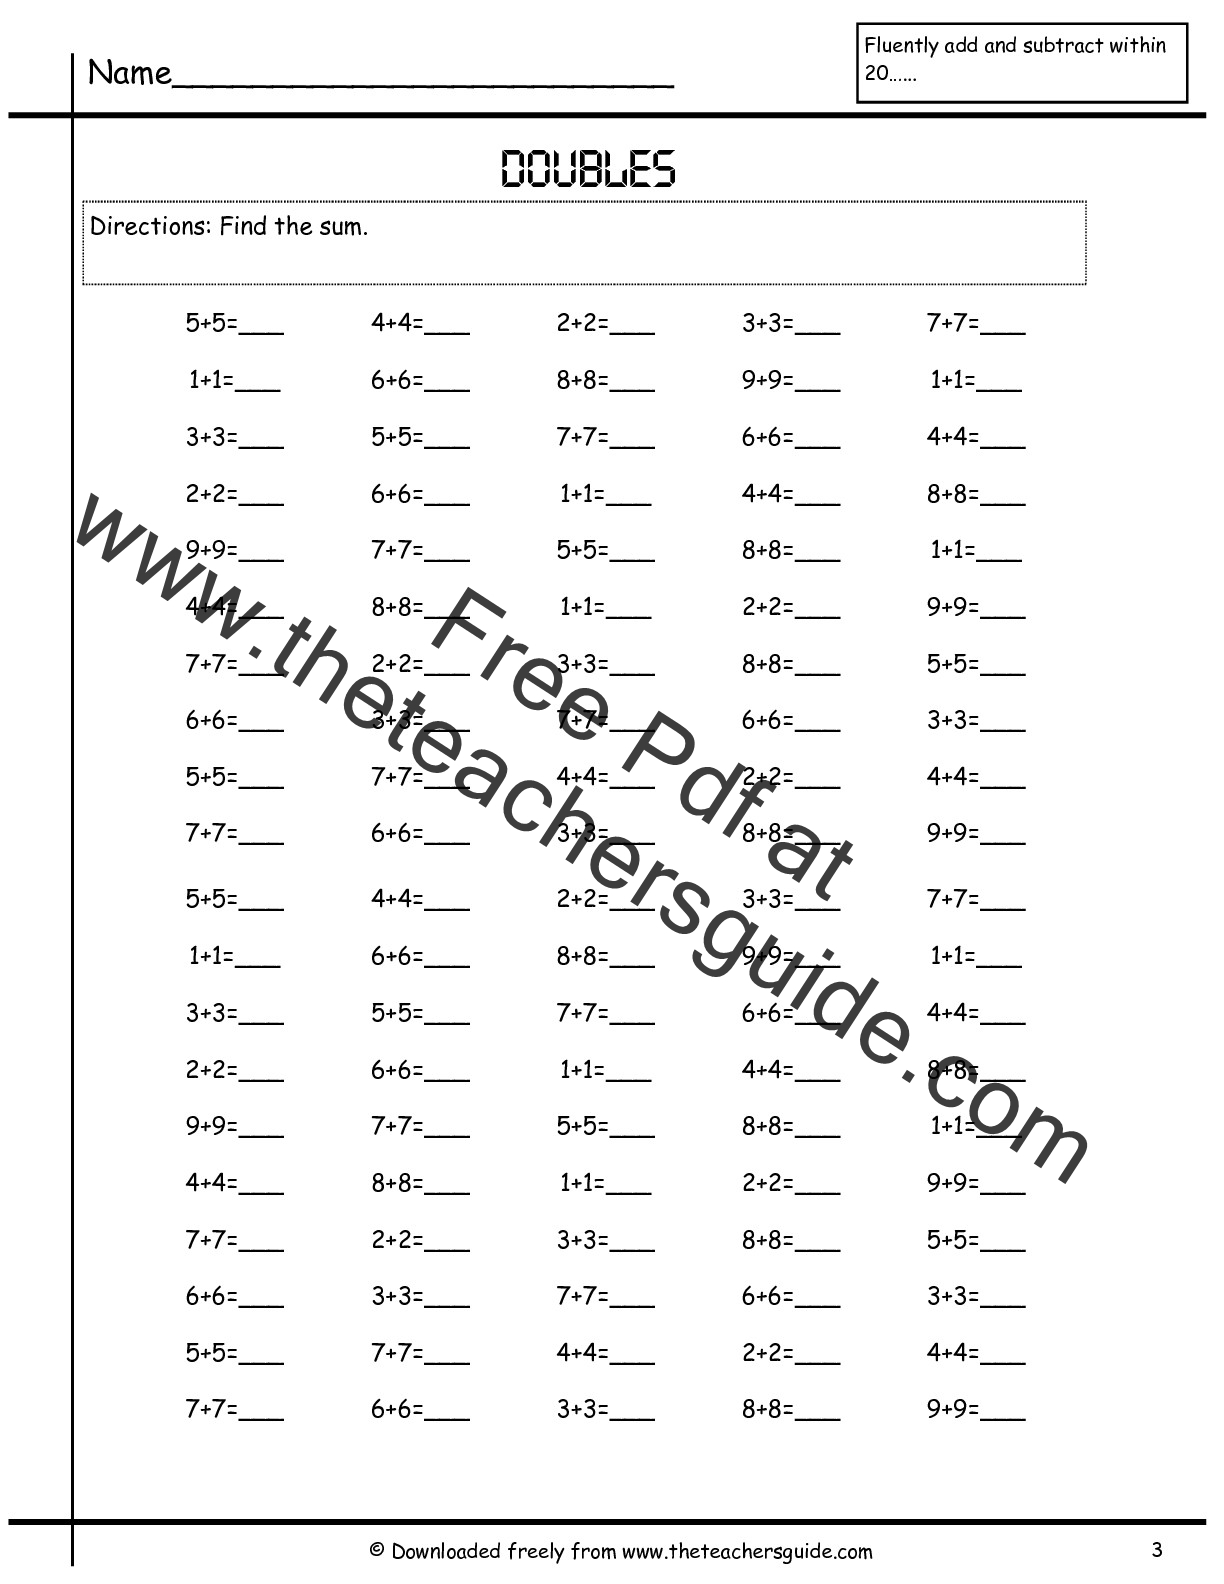 11-best-images-of-three-digit-multiplication-worksheets-2-digit-by-1